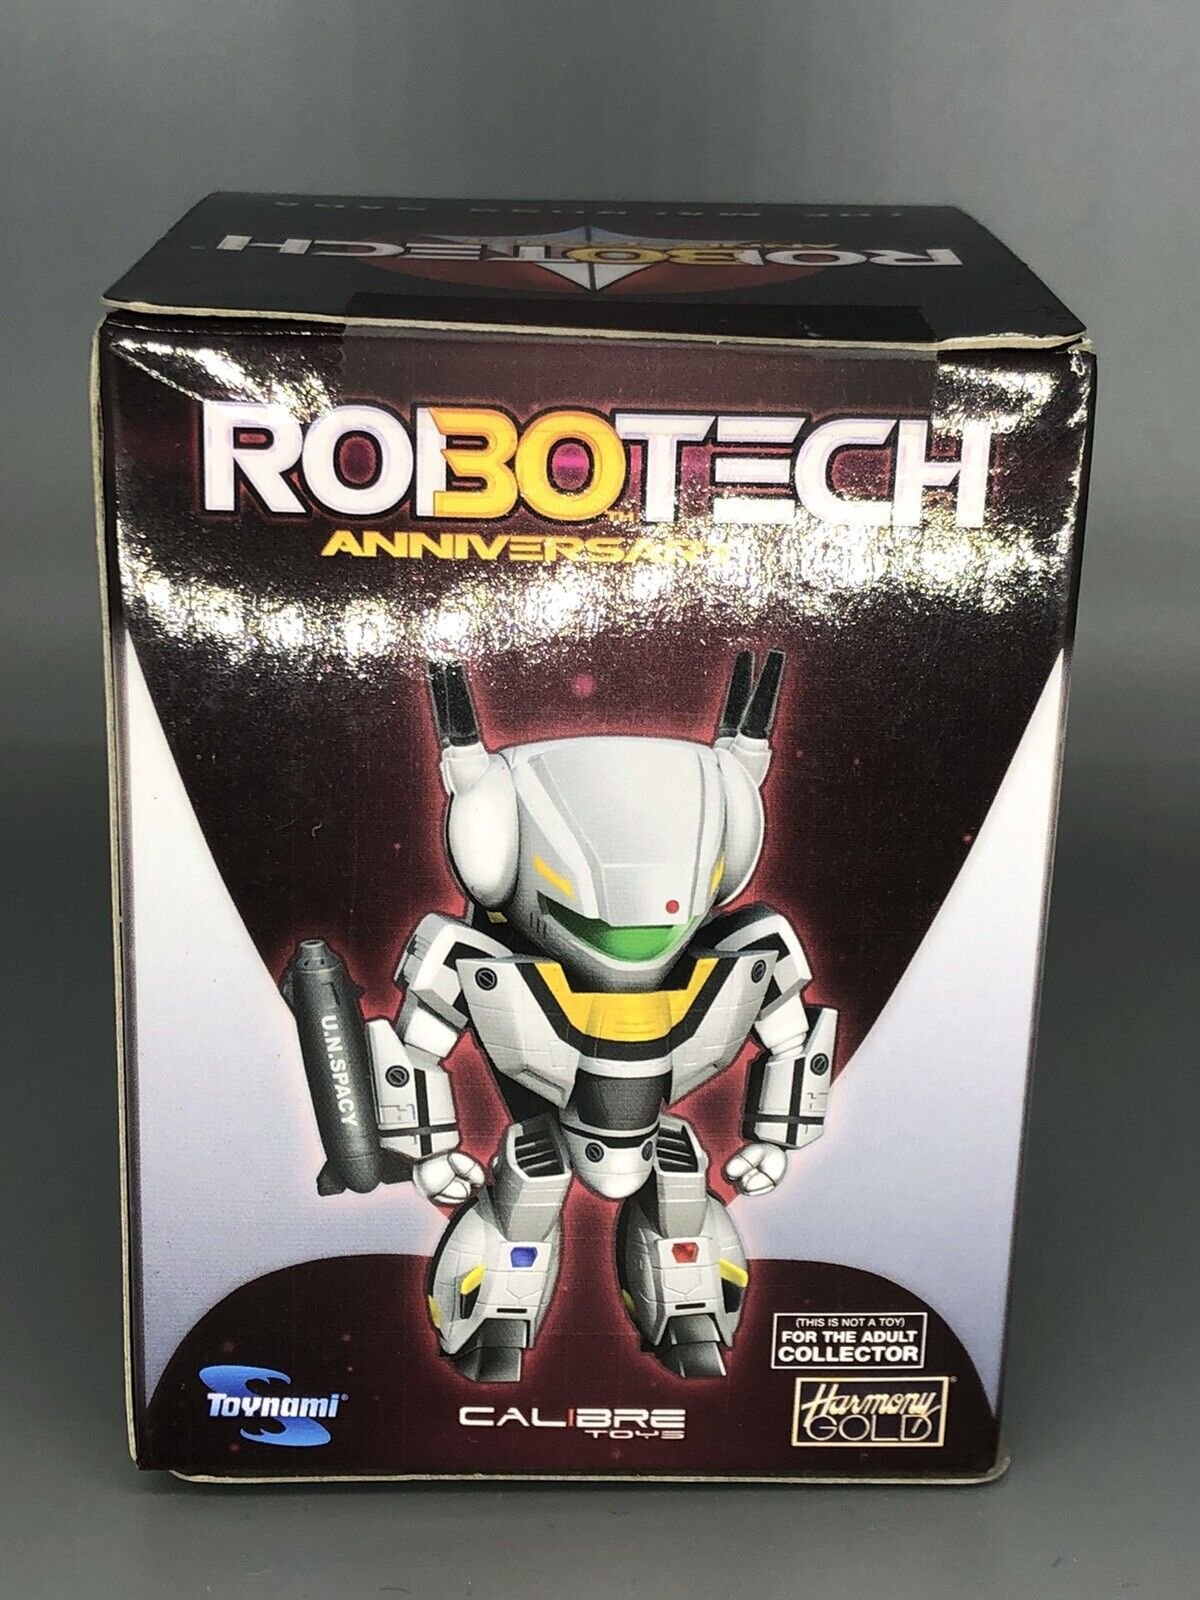 Robotech with a surprise mini-figure from the Macross Saga